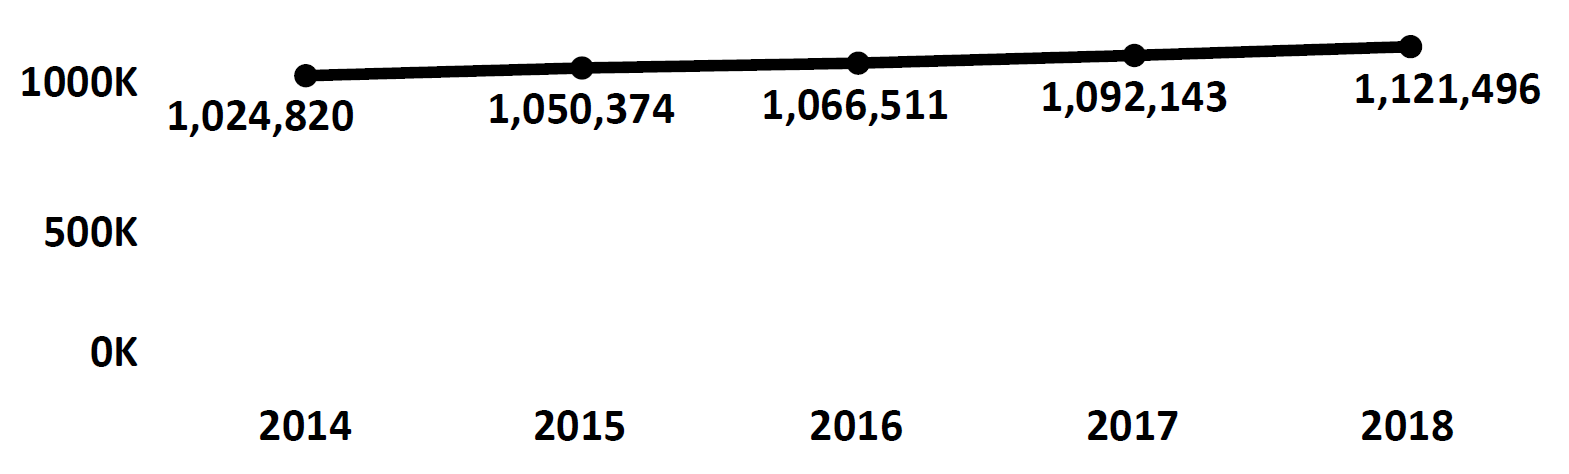 Graph of active Do Not Call registrations in Maine each fiscal year from 2014 to 2018. In 2014 there were 1 million numbers registered, which increased each year. In 2018 there were 1.1 million numbers registered.